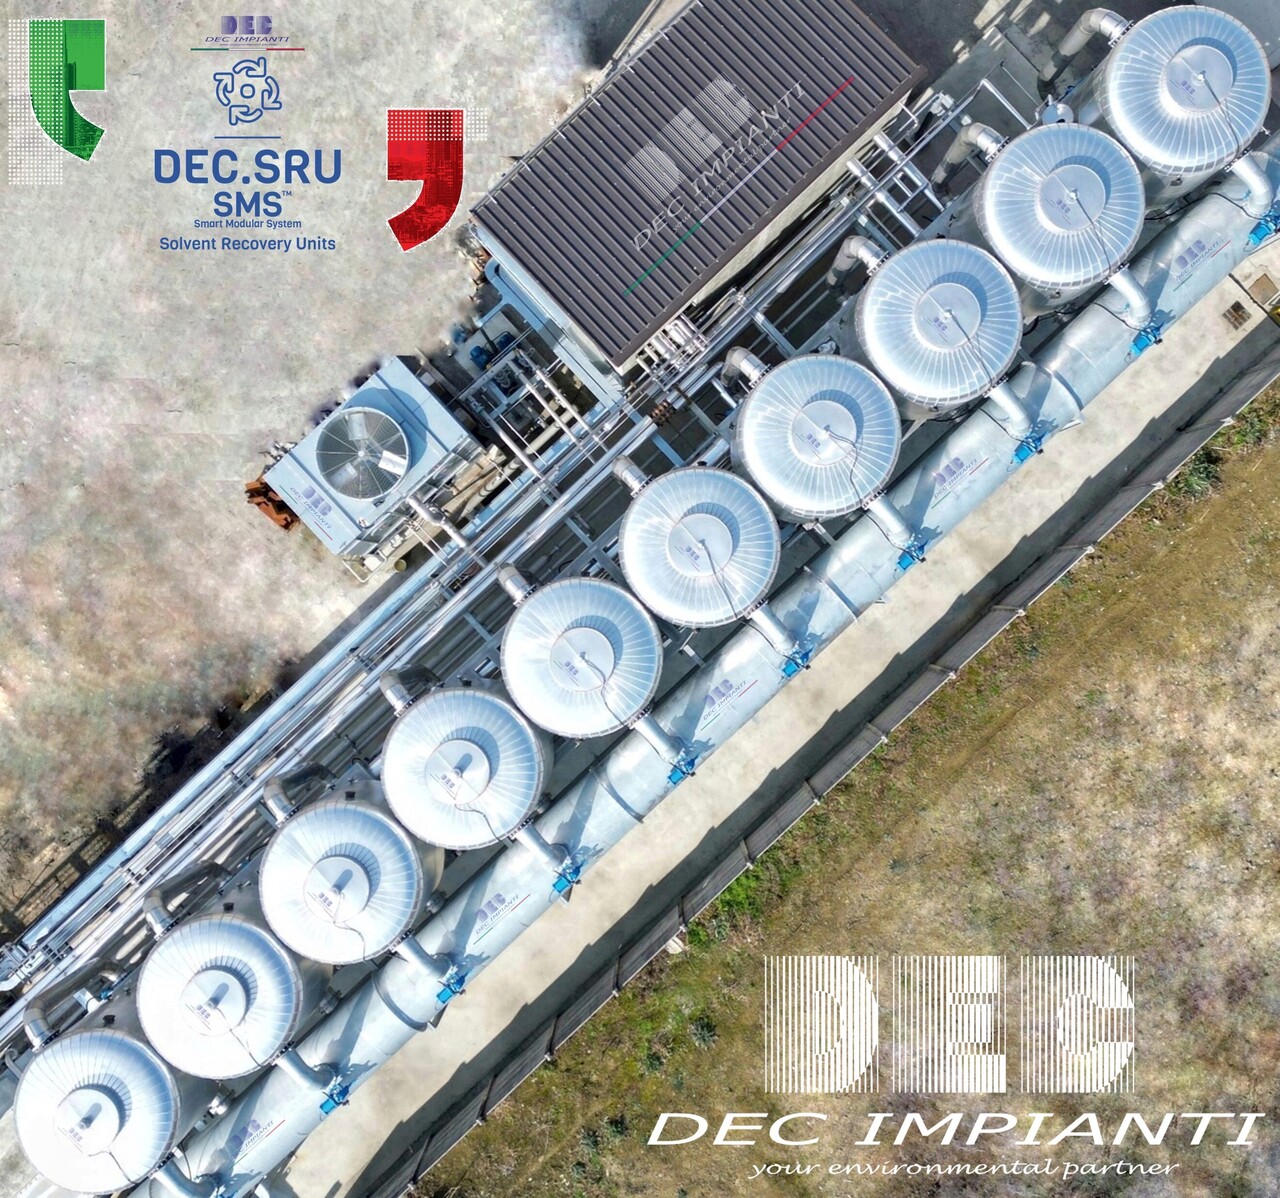 DEC IMPIANTI, DEC, solvent recovery for label converting industry, SRU, SRS, SRP, label, converting, VOC emission control, solvent recovery, VOC recovery, VOC abatement, VOC emission control technology, VOC abatement systems, air pollution control, solvent recovery systems, environmental compliance, VOC recovery system, solvent recovery unit, VOC recovery equipment, solvent recovery equipment, solvent recycling, VOC capture, solvent reclamation, solvent purification, VOC treatment, solvent regeneration, distillation, solvent distillation, VOC recovery process, activated carbon, adsorbent, ethyl acetate, ETAC, MEK, nitrogen, N2, LEL monitoring, engineering, supply, turnkey, sustainable, innovation, decarbonization, energy efficiency, chemical recycling, recycling, sustainability solutions, sustainability, reclaiming, carbon offset, circular economy, climate change, climate policy, climate action, environmental challenges, sustainable development, sustainability roadmap, Cerutti, Rotomec, Bobst, Nordmeccanica, Flexotecnica, Windmoeller Hoelscher, Uteco, Kohli, Comexi, Acom, SAM, Beiren, Huitong, Pelikan